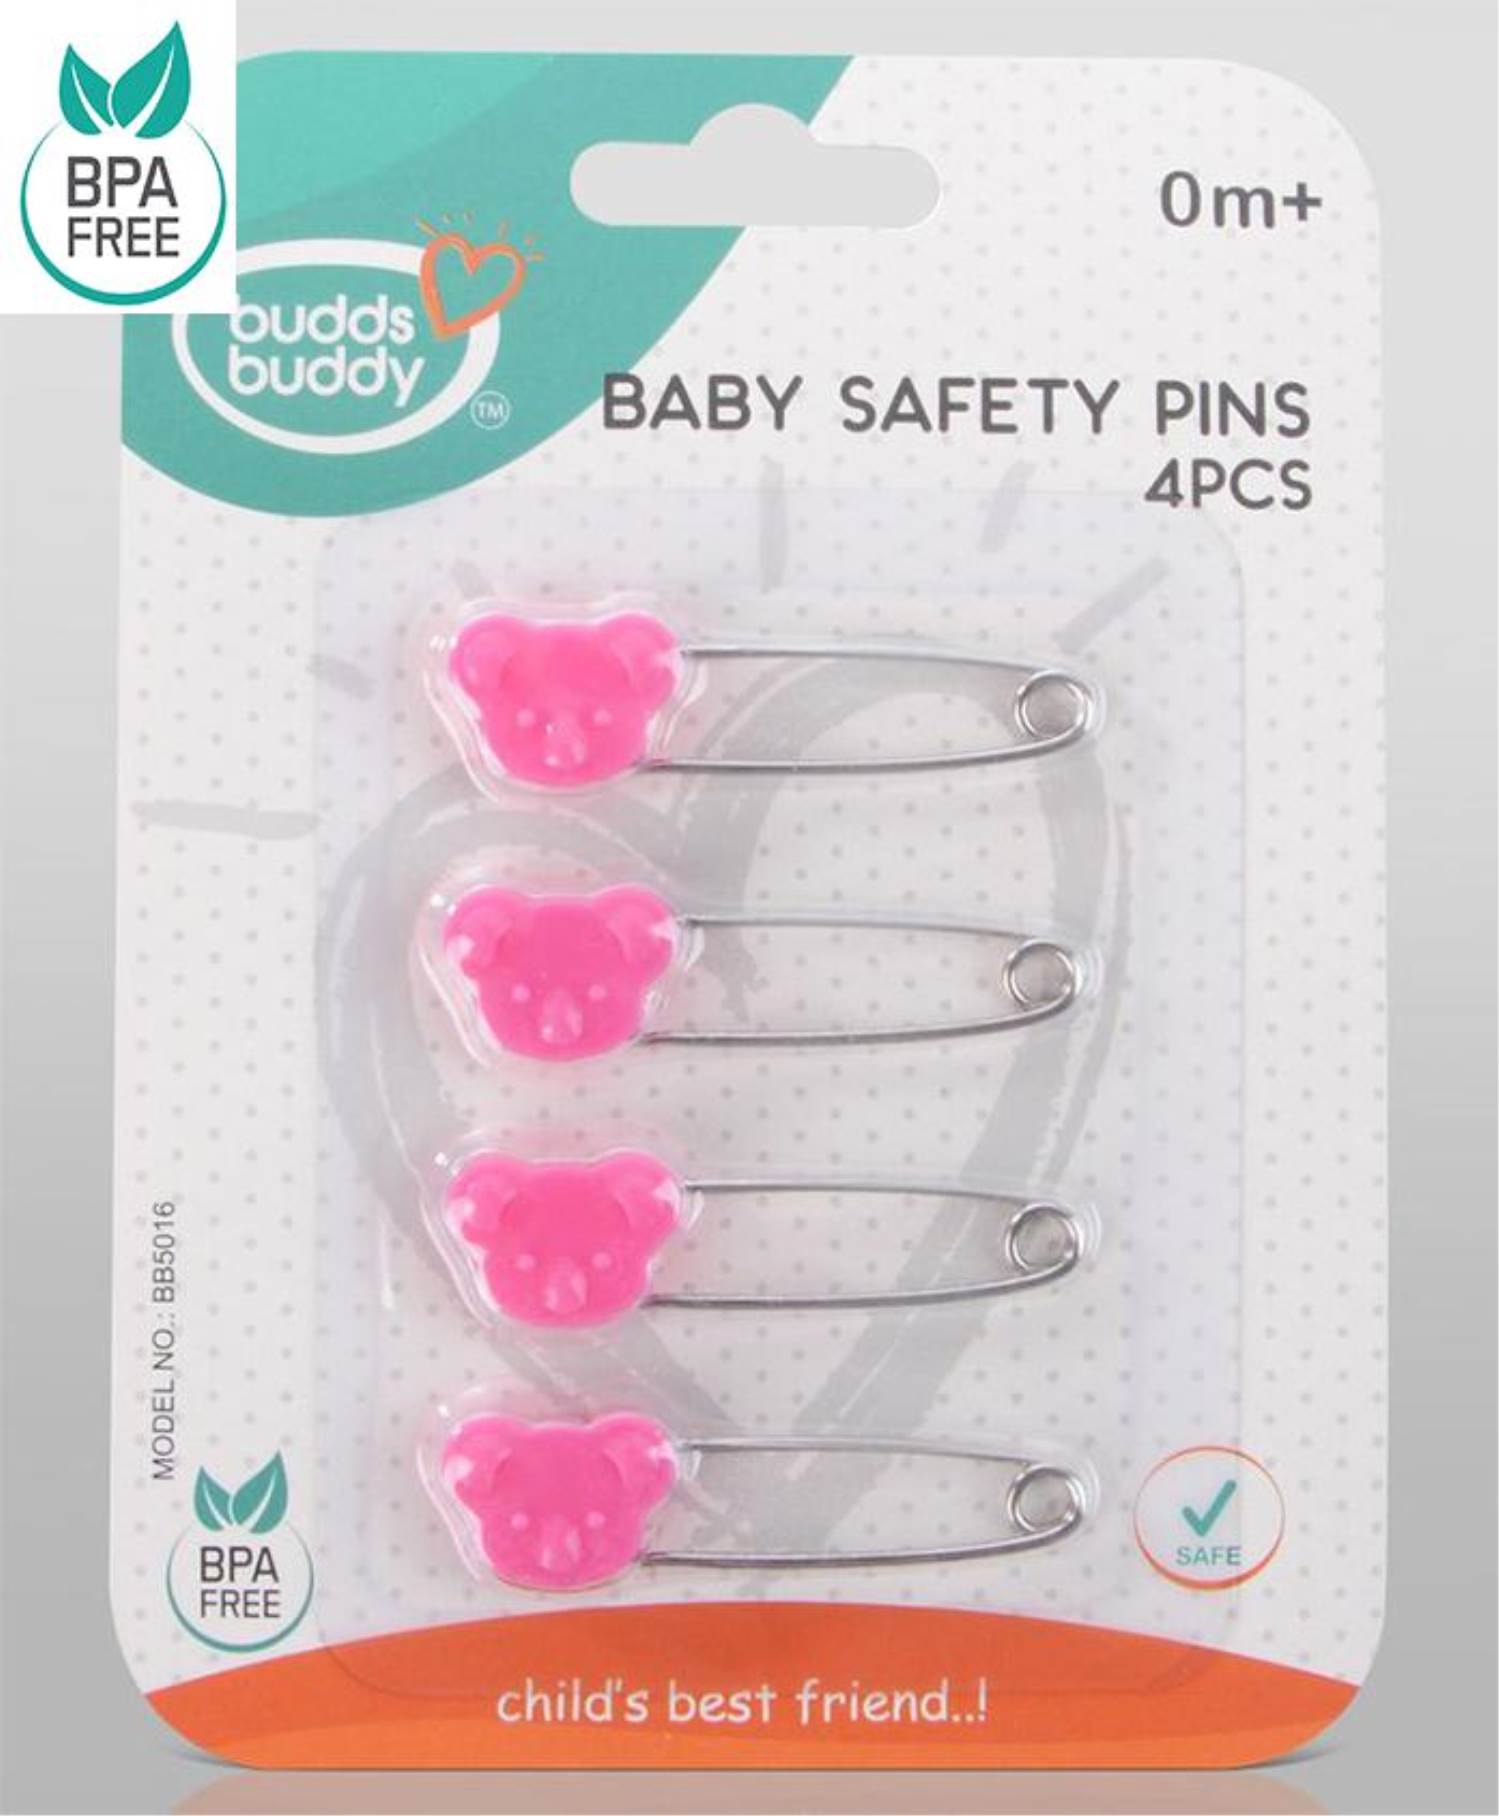 Buddsbuddy Baby Safety Pins - 4 pieces (Pink) :: SMILE BABY